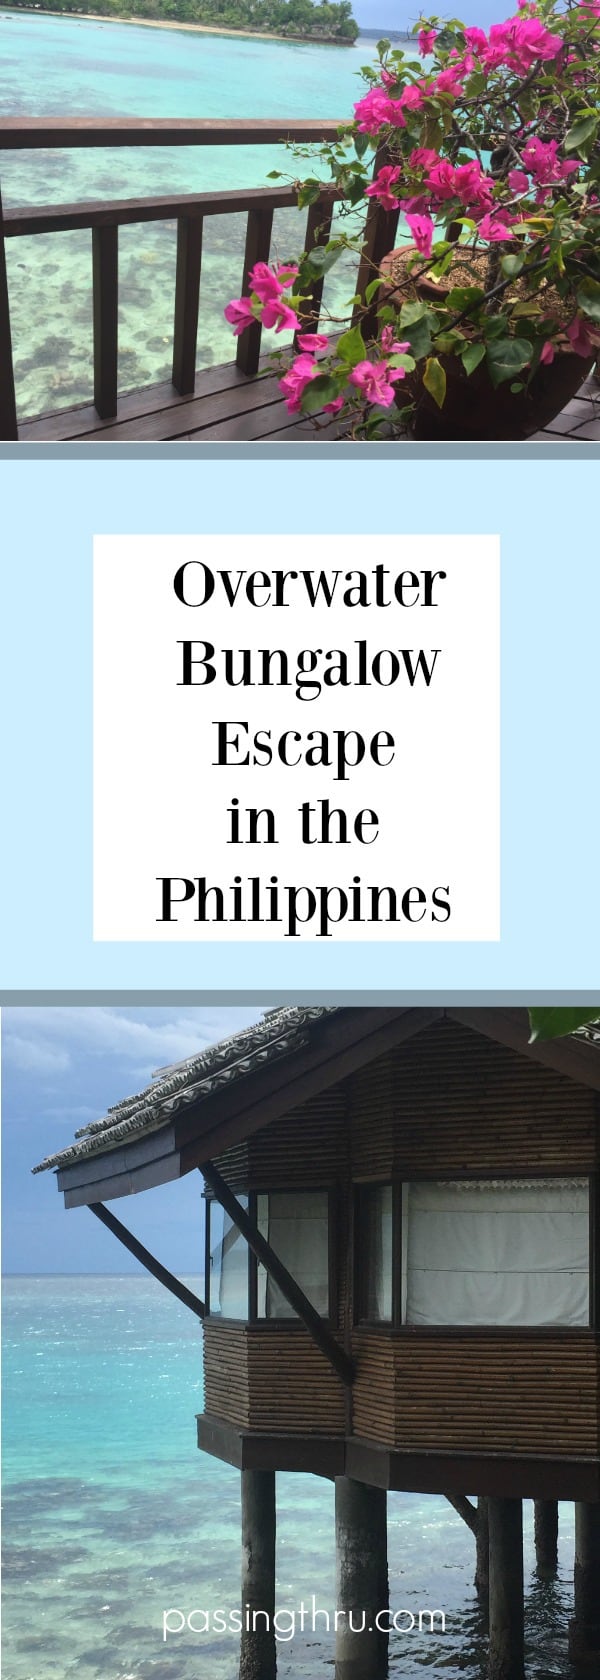 Overwater Bungalow in the Philippines